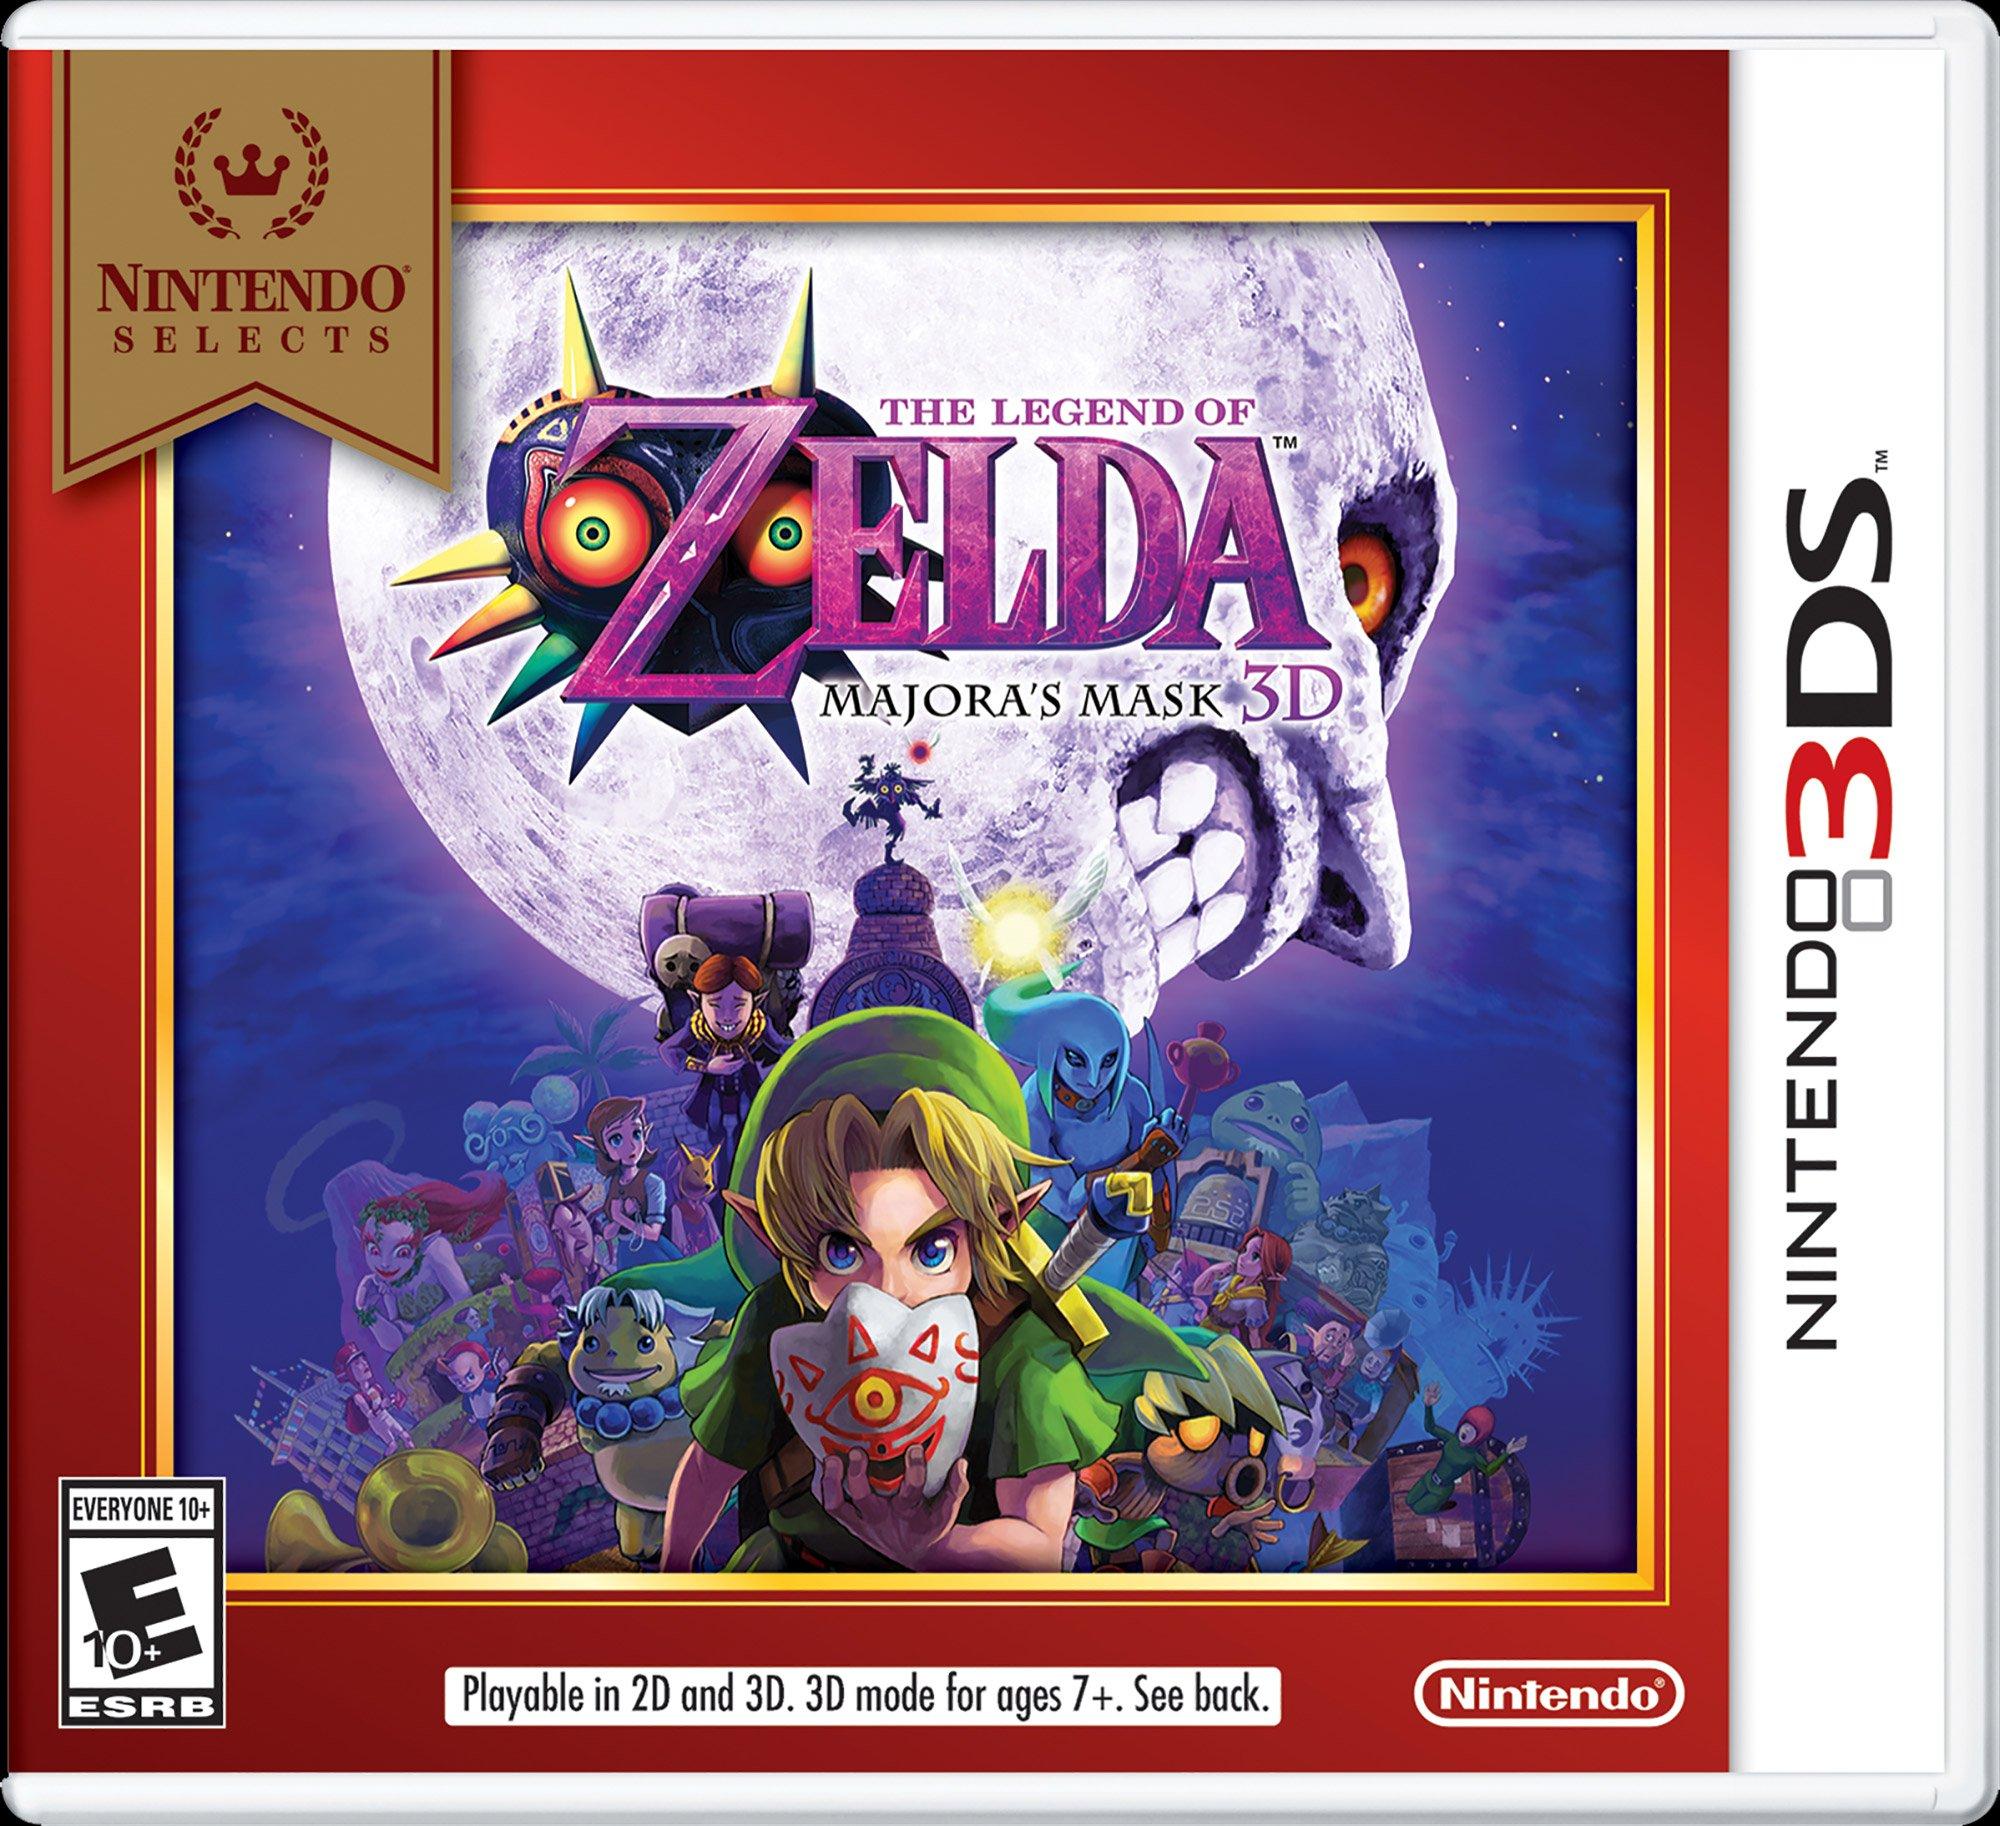 ocarina of time 3ds free download code